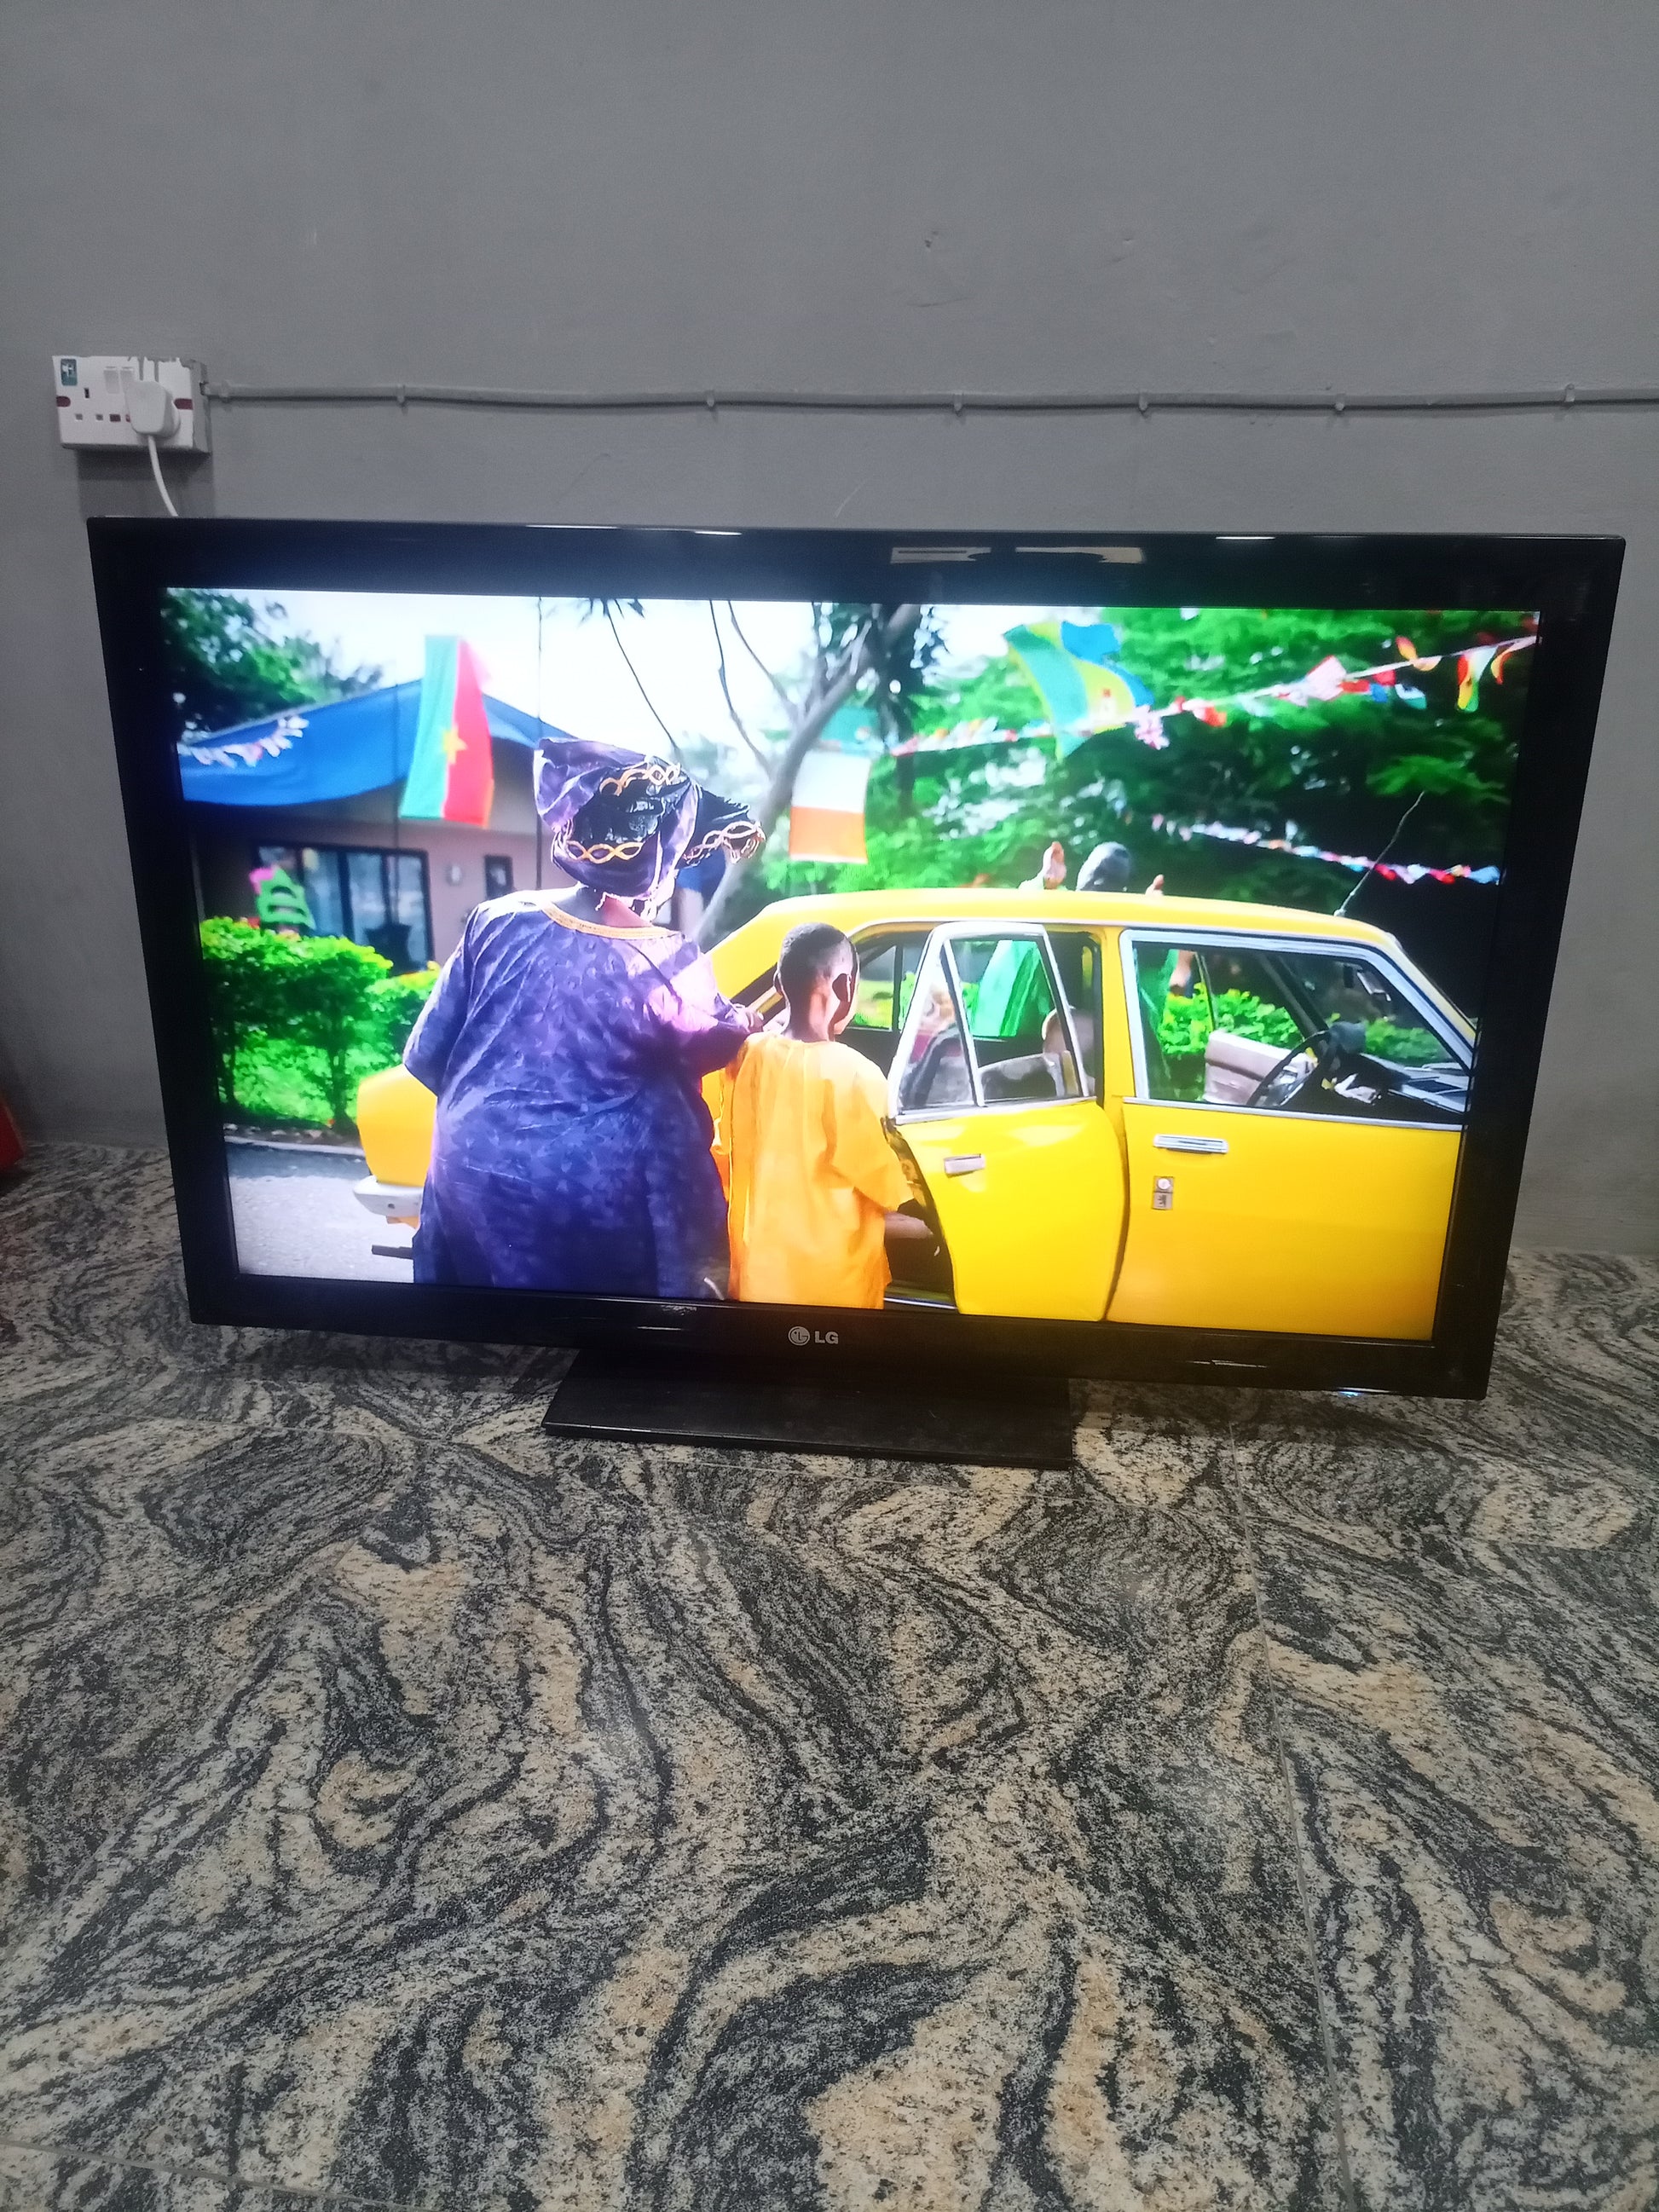 LG 42 Inch 42LH3000 Widescreen 1080p FHD LCD TV + USB Support - London used